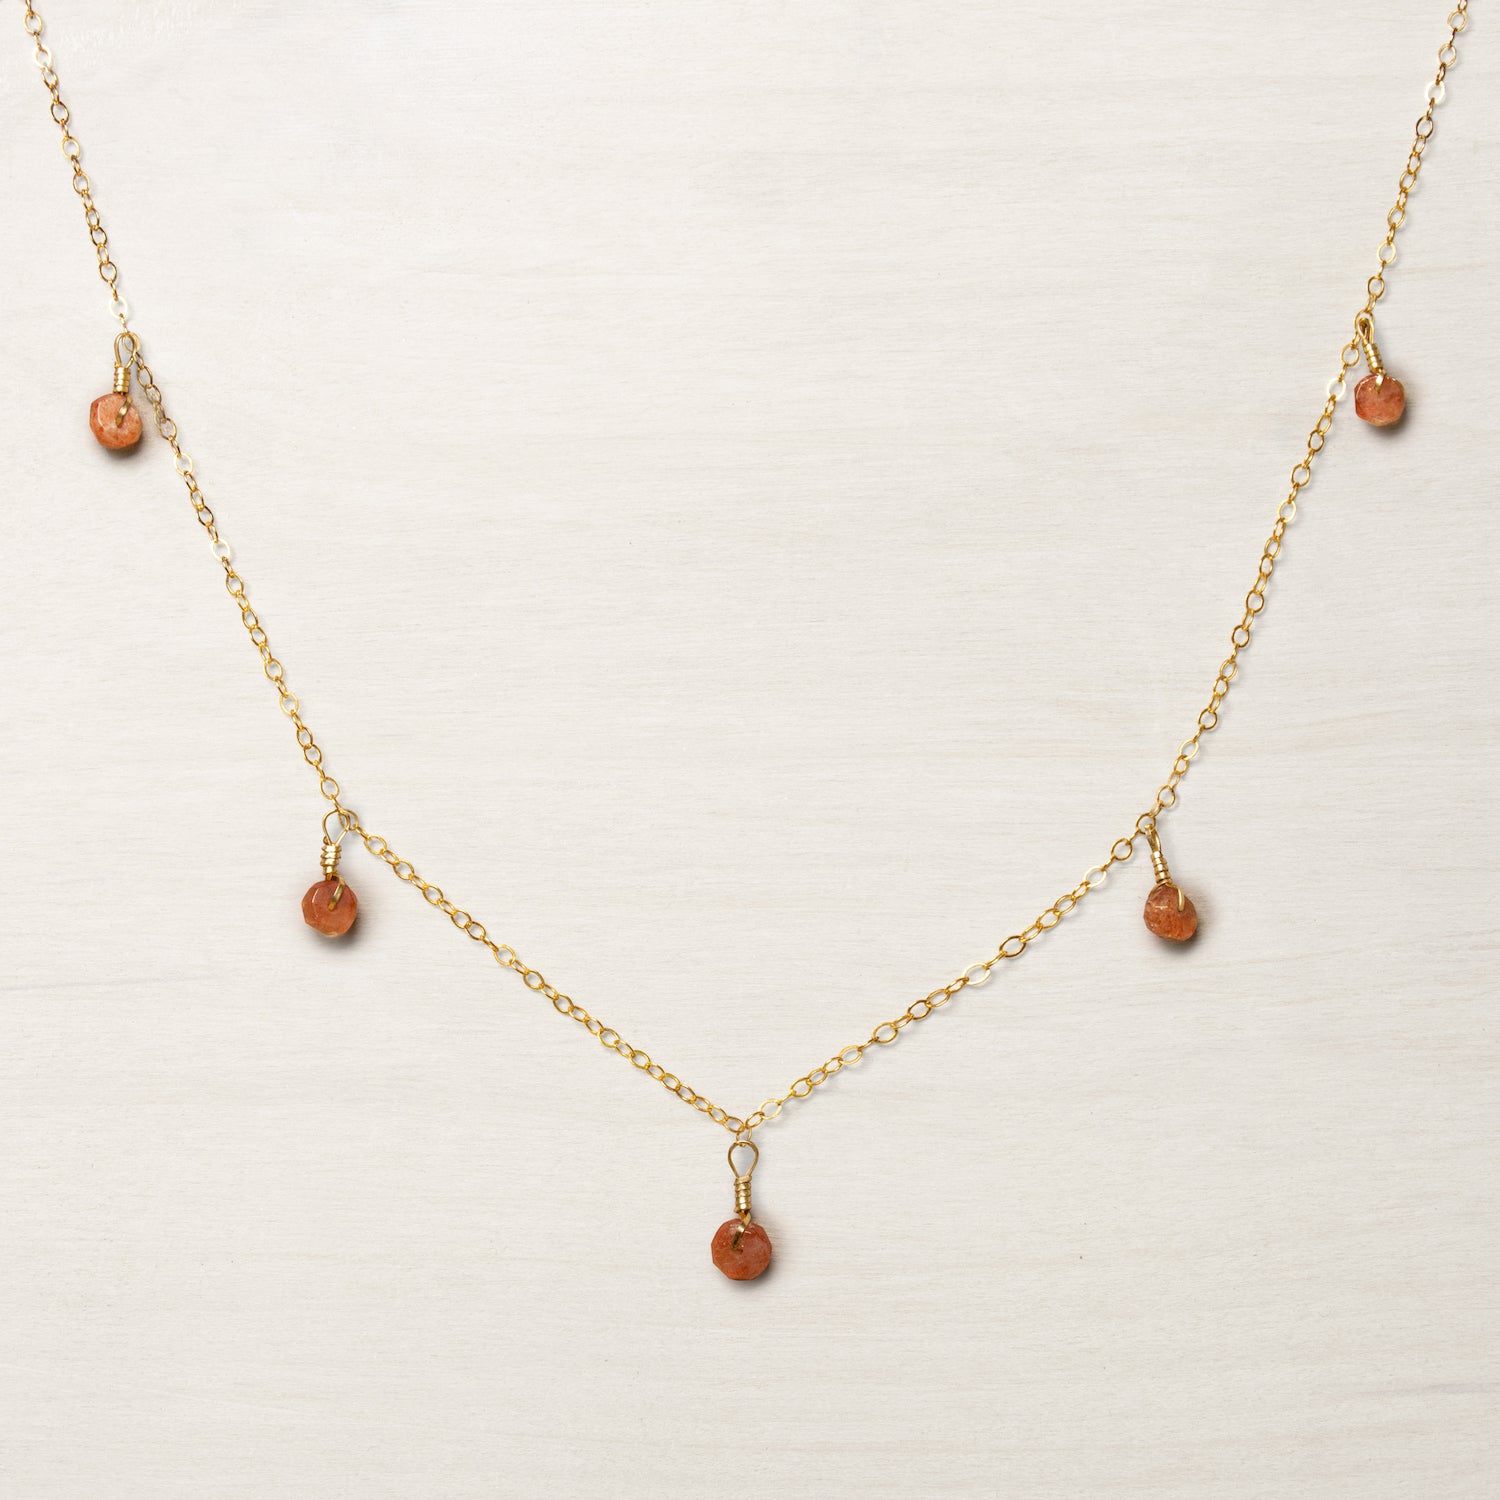 multi-gemstone necklace with sunstone in gold